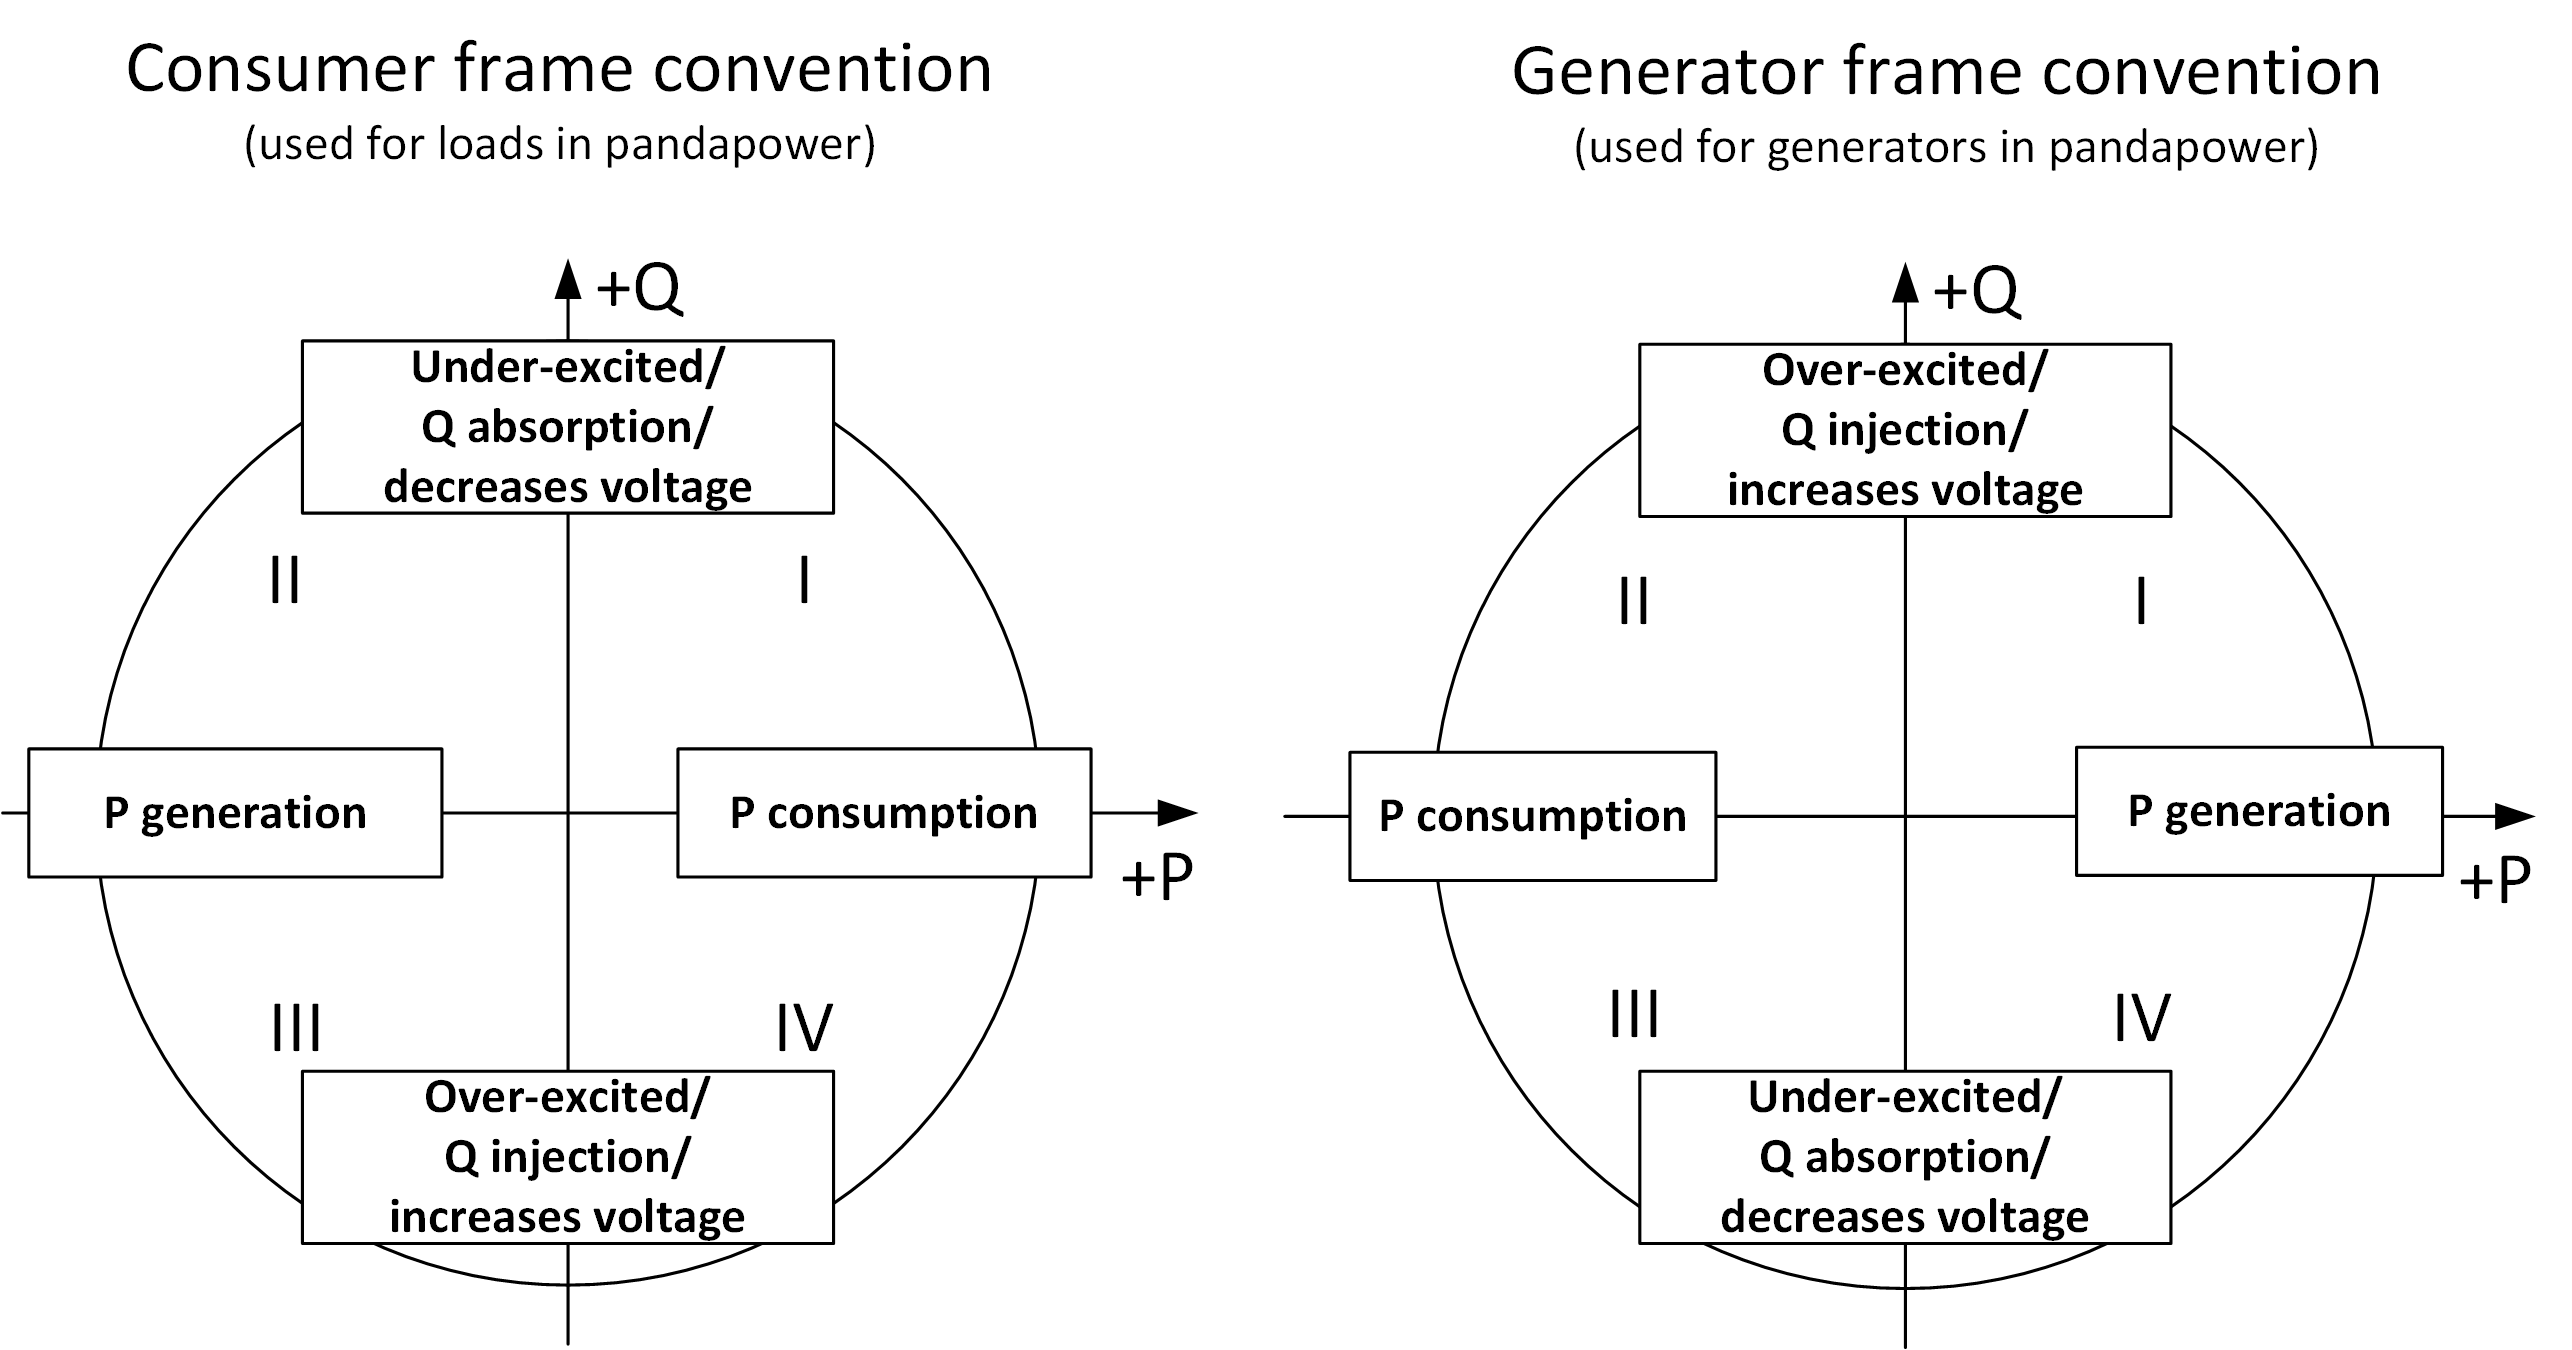 in consumer frame convention (load-like elements), P is positive for consumption Q is positive for absorption (underexcited behavior, decreases voltage). For generator frame convention (gen-like elements), the opposite applies.